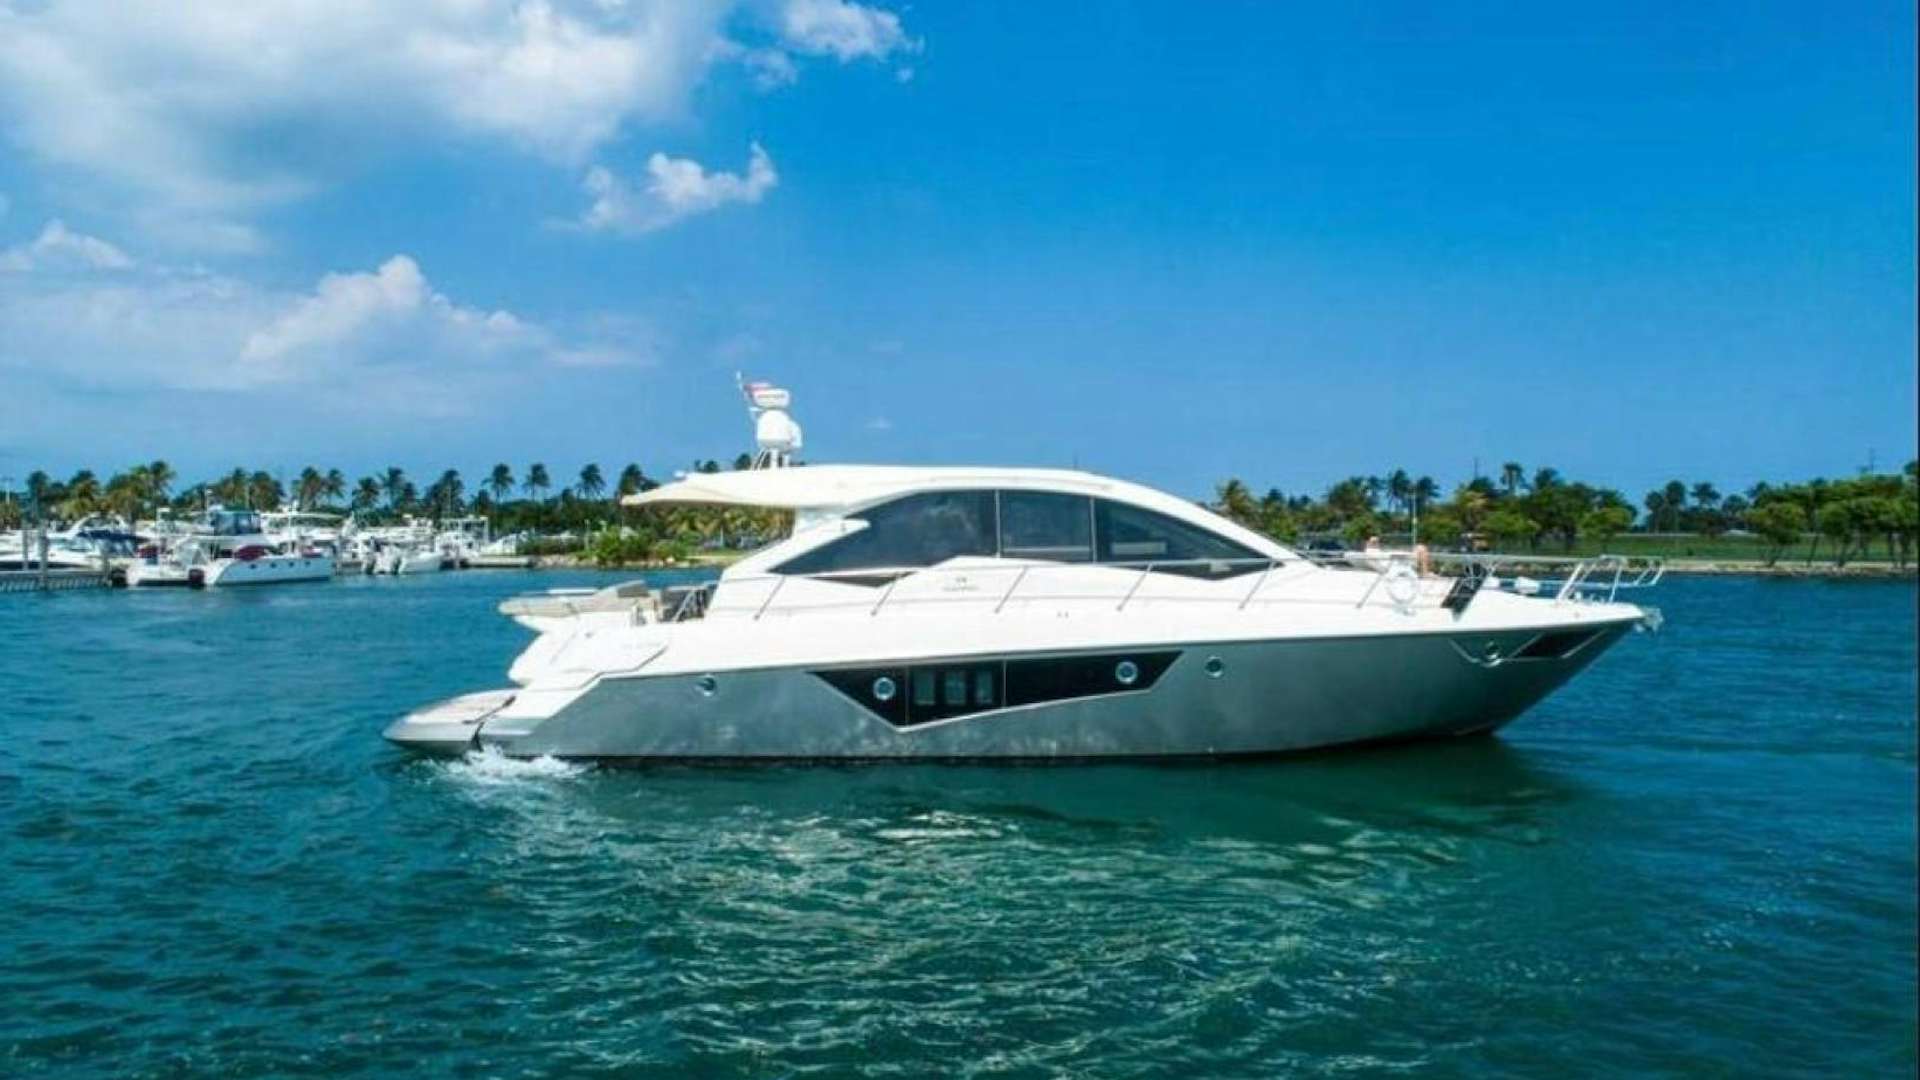 Watch Video for INFINITO Yacht for Sale